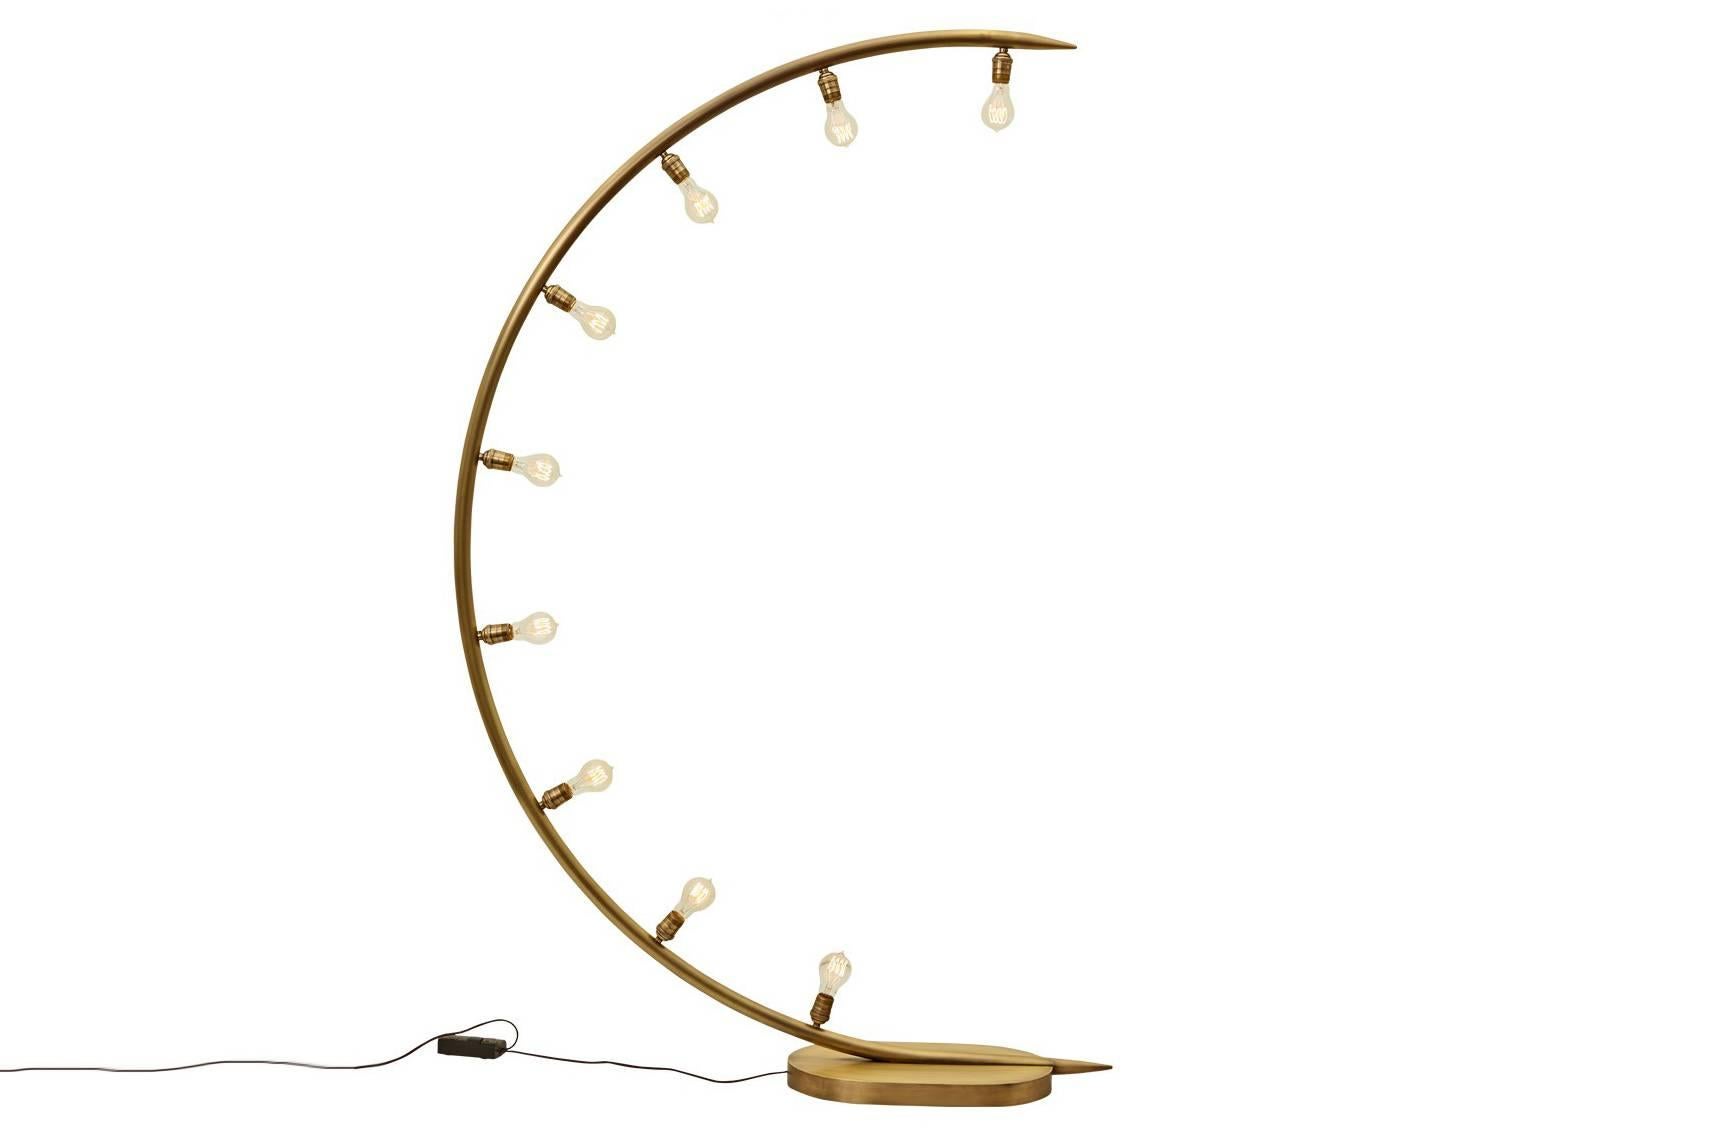 The crescent moon floor lamp is made of hand forged bronze and has nine medium bulb sockets. The bulb choice dramatically changes the look and vibe of the lamp as well as its effect on the room. Nine Edison style bulbs are included. The Crescent